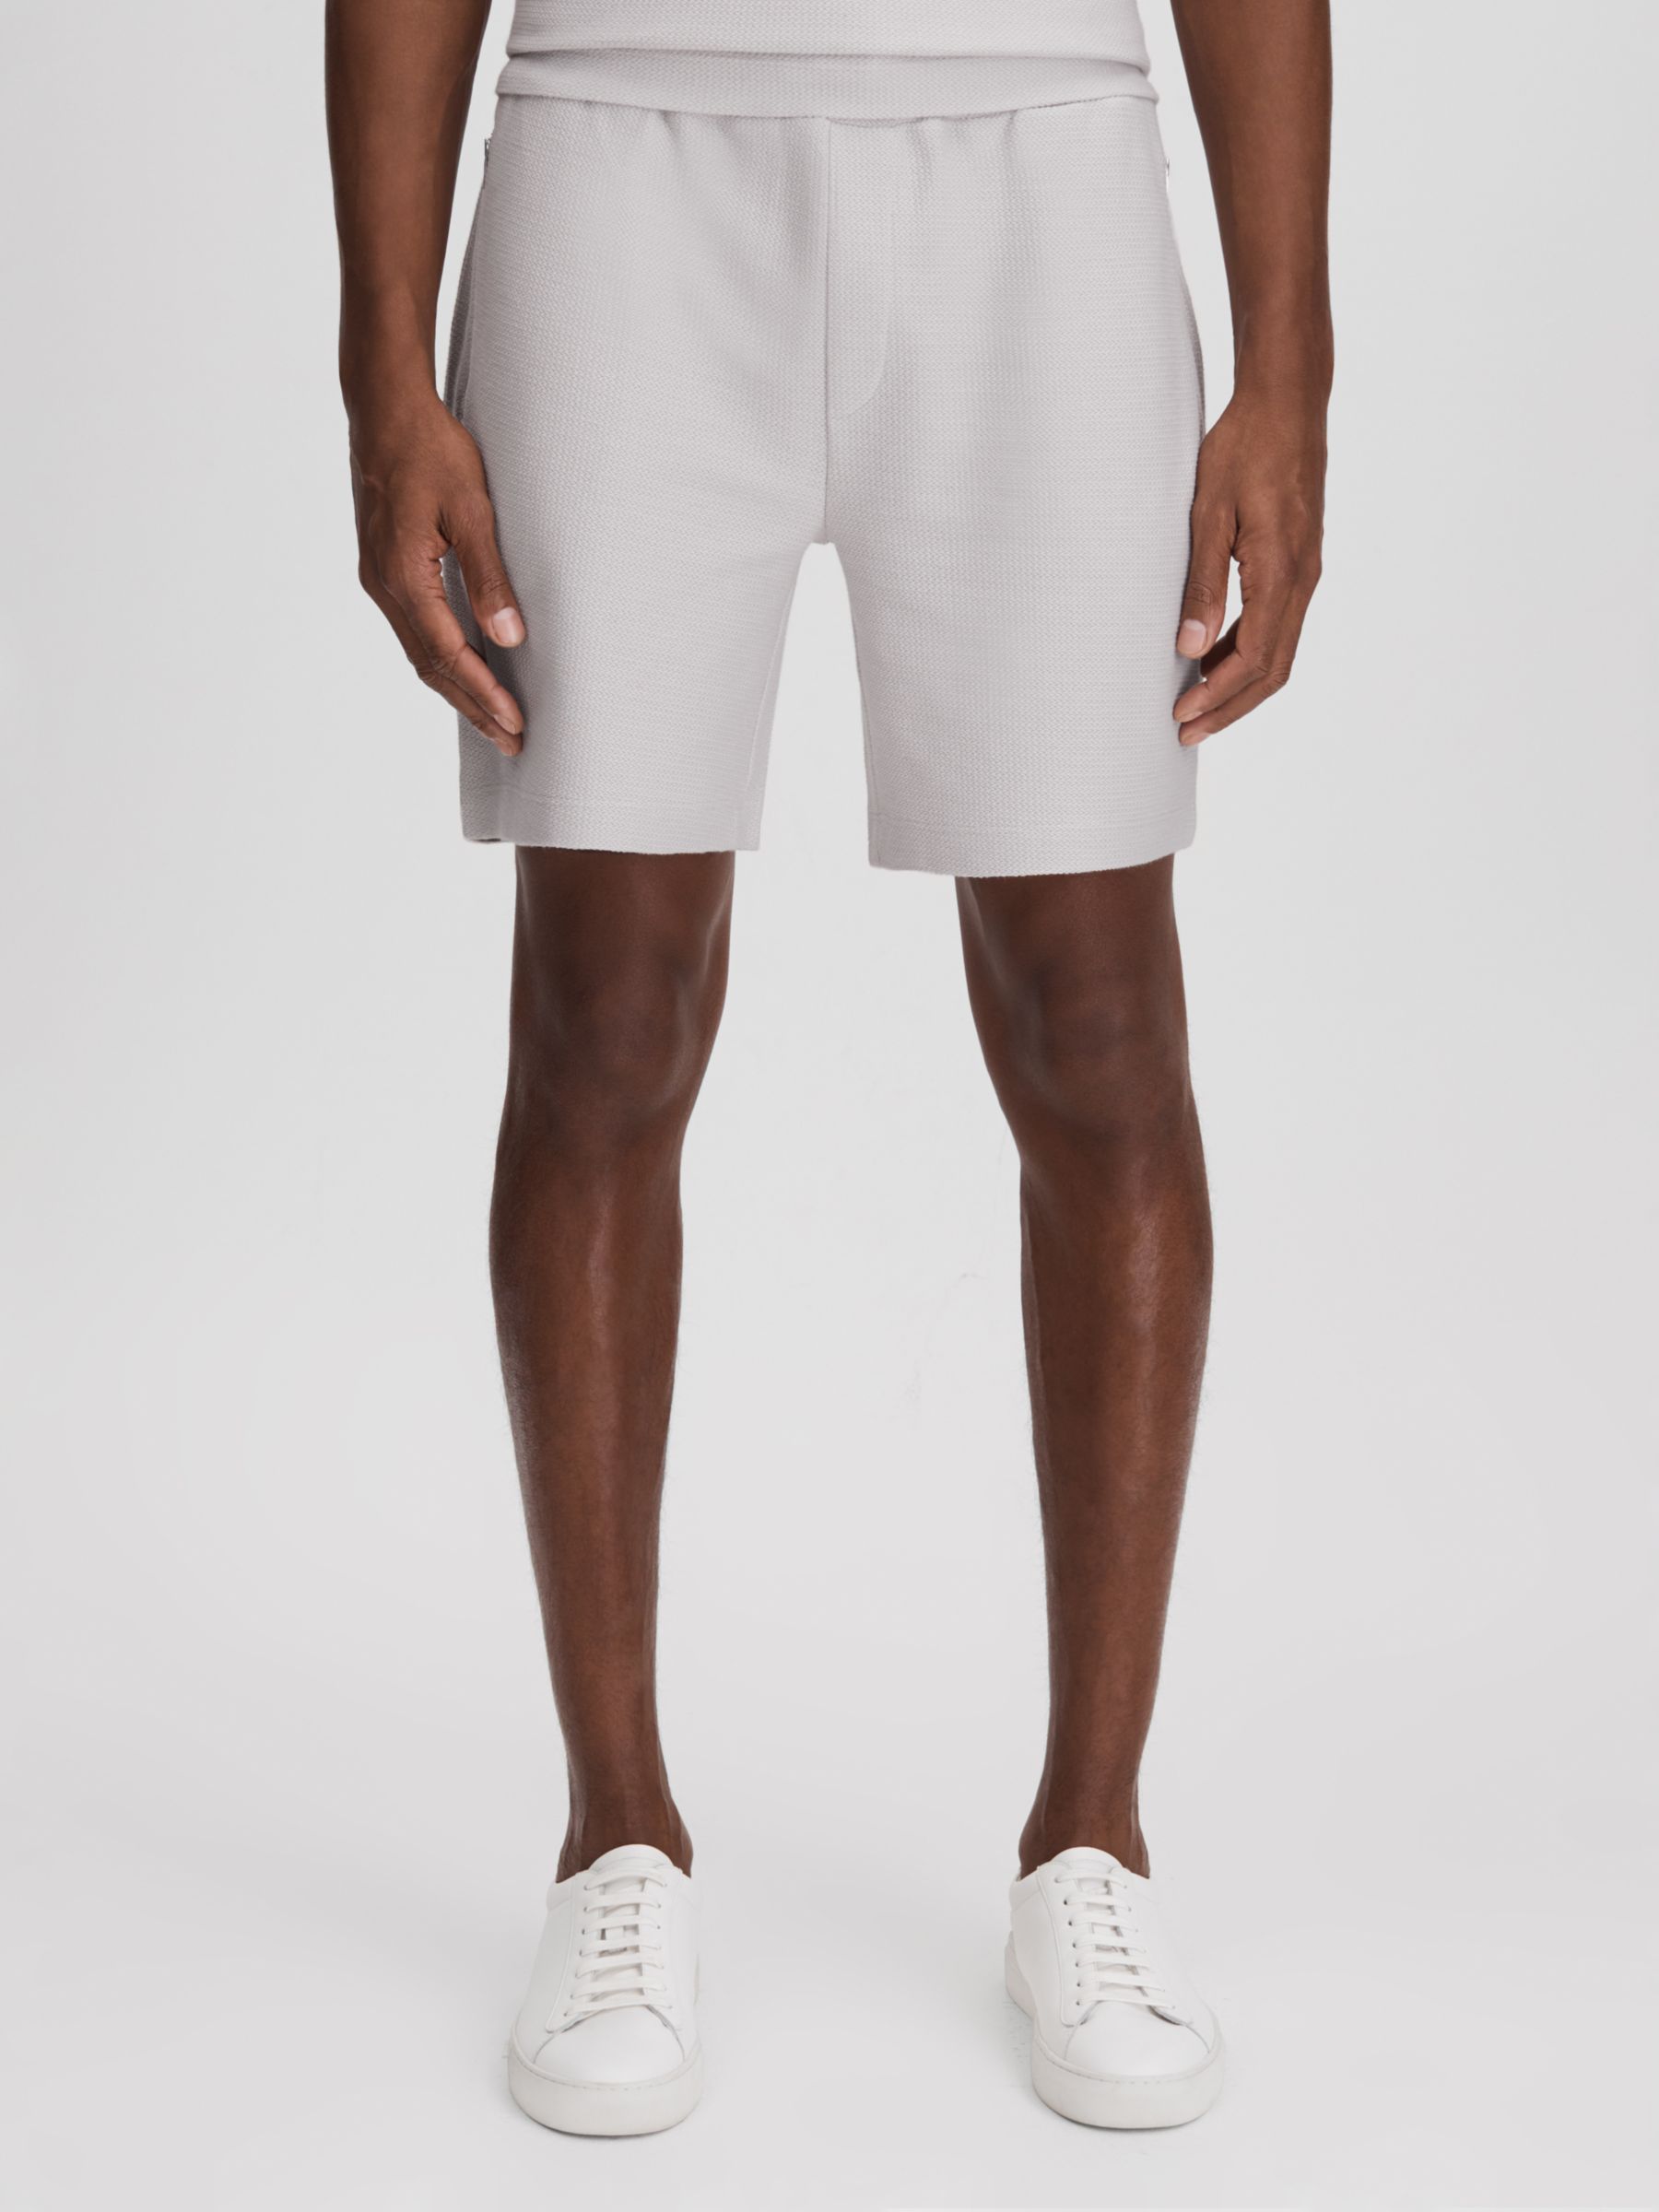 Reiss Hester Textured Drawstring Shorts, Silver, XS